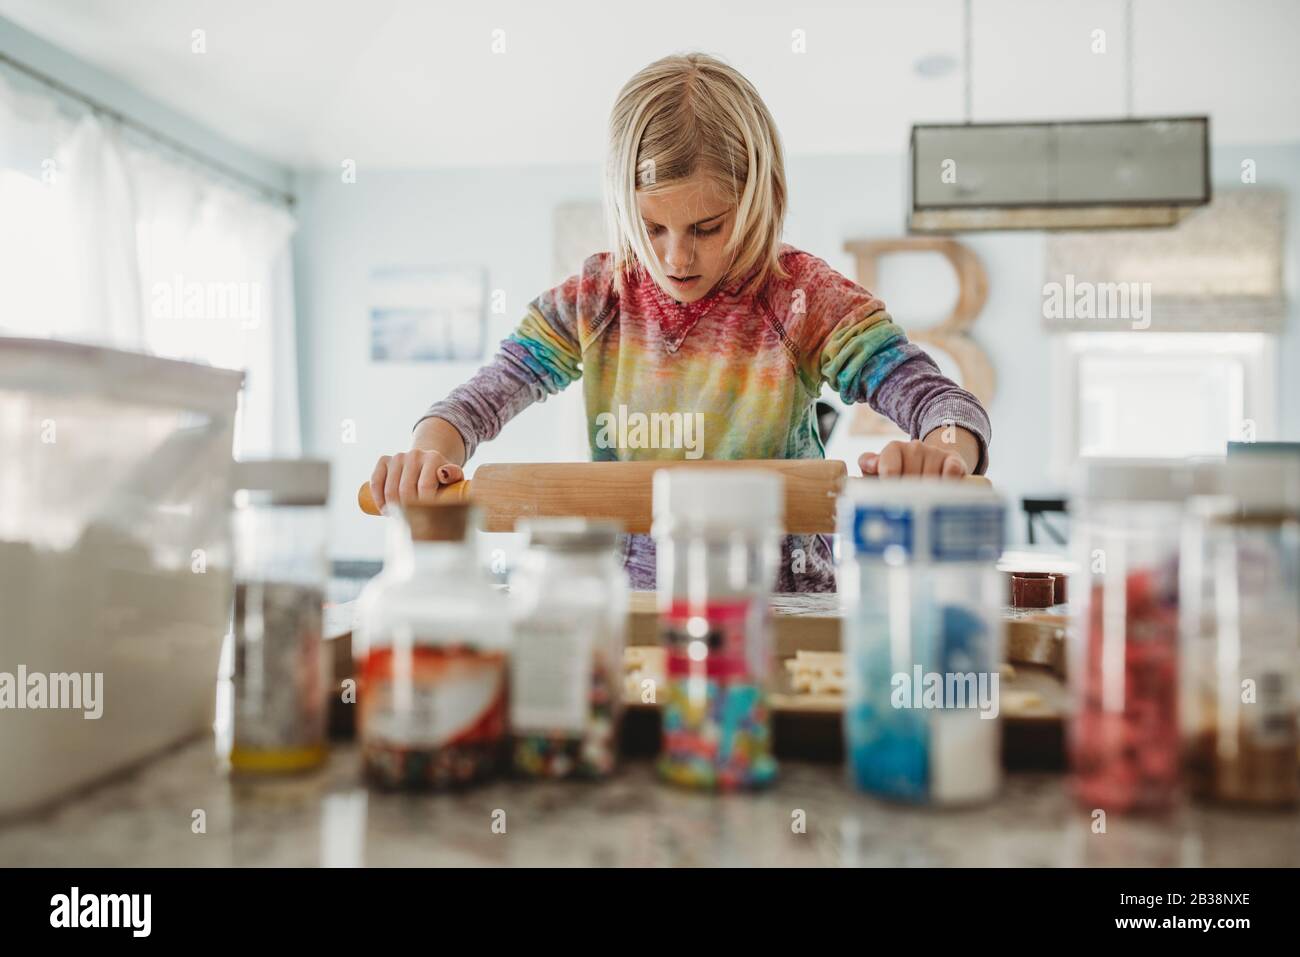 Young girl using a rolling pin to bake cookies in the kitchen Stock Photo